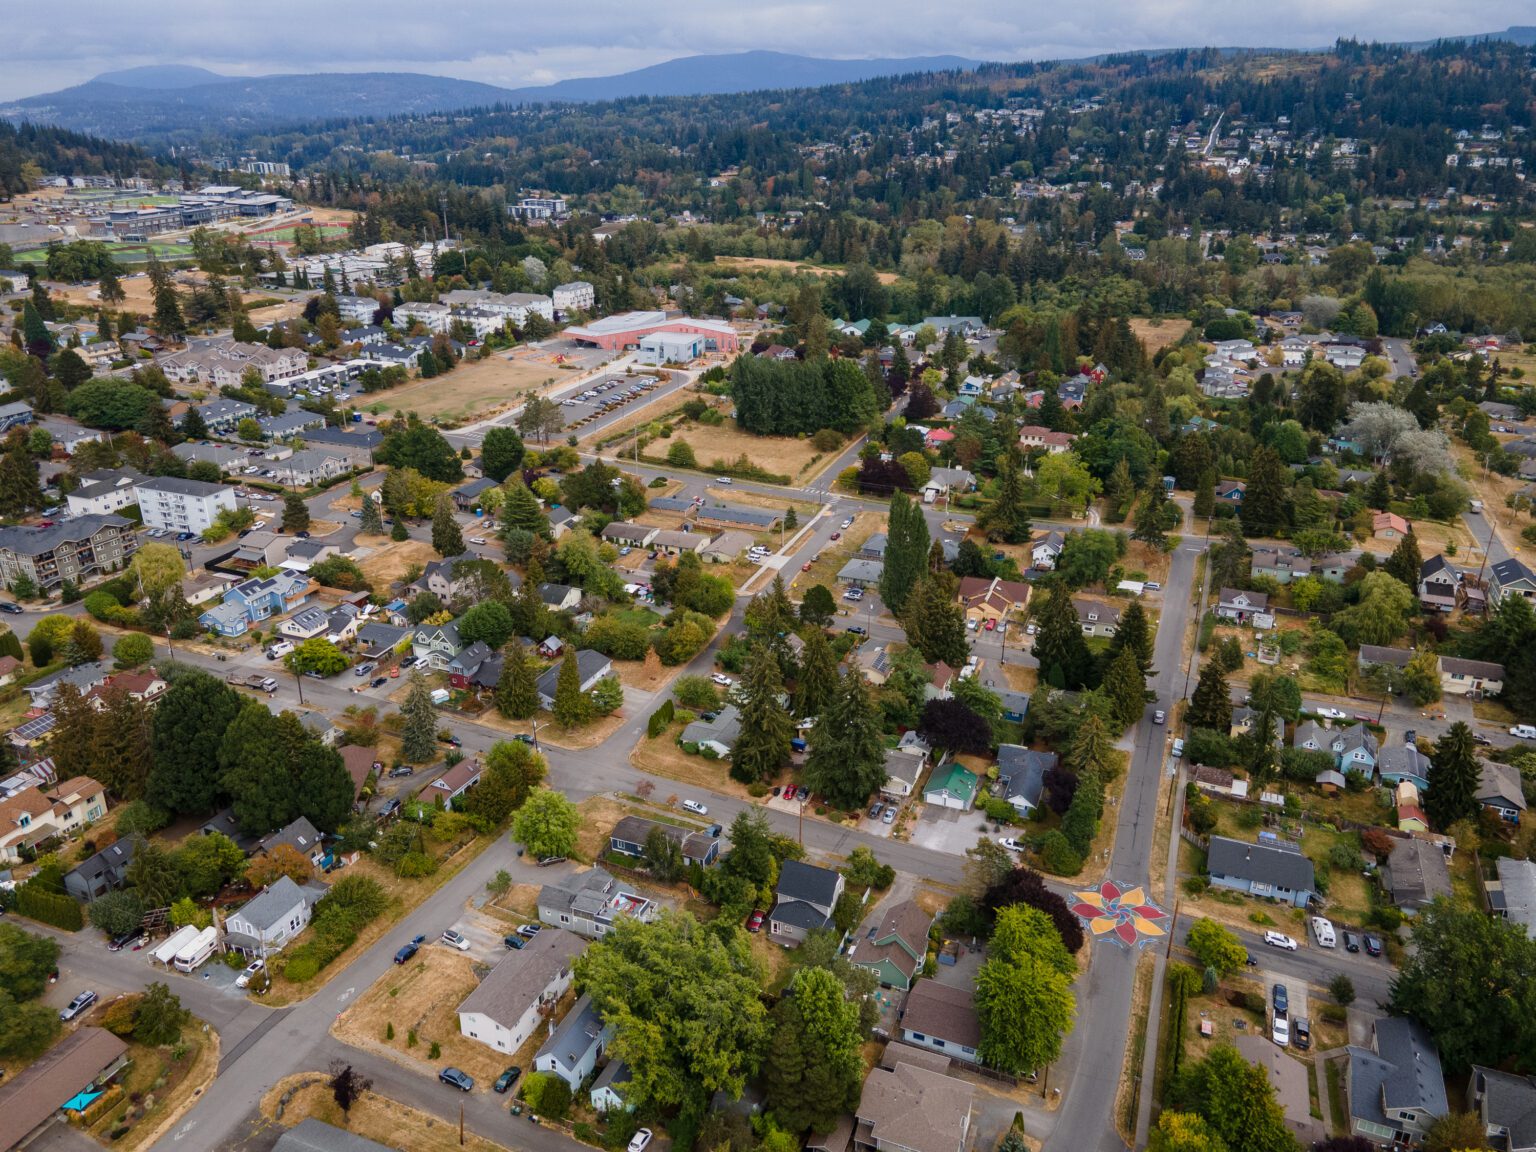 Happy Valley took the lead among Bellingham neighborhoods in permitting detached accessory dwelling units on the same lot as existing single-family homes. The Bellingham City Council legalized ADUs citywide in 2018